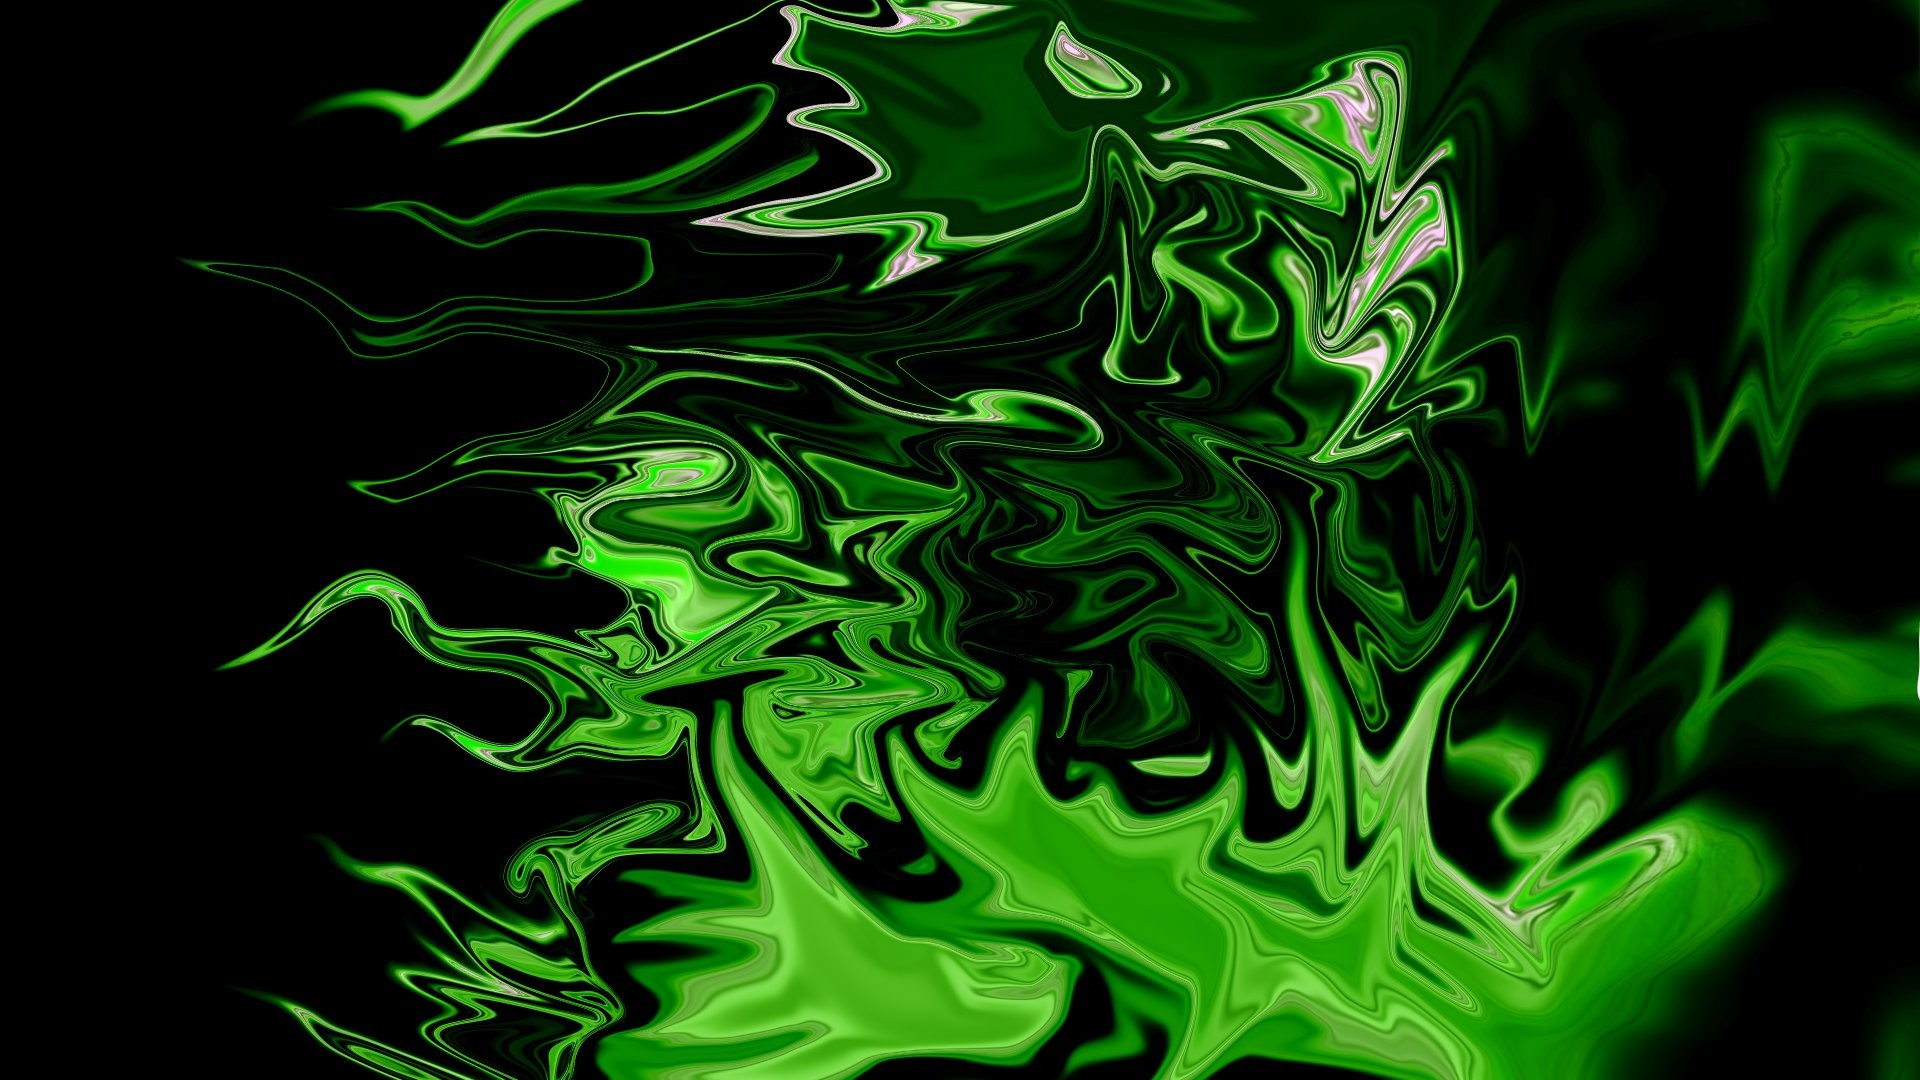 1920x1080 ... Download Free Green Neon Backgrounds - Page 3 of 3 - wallpaper.wiki ...